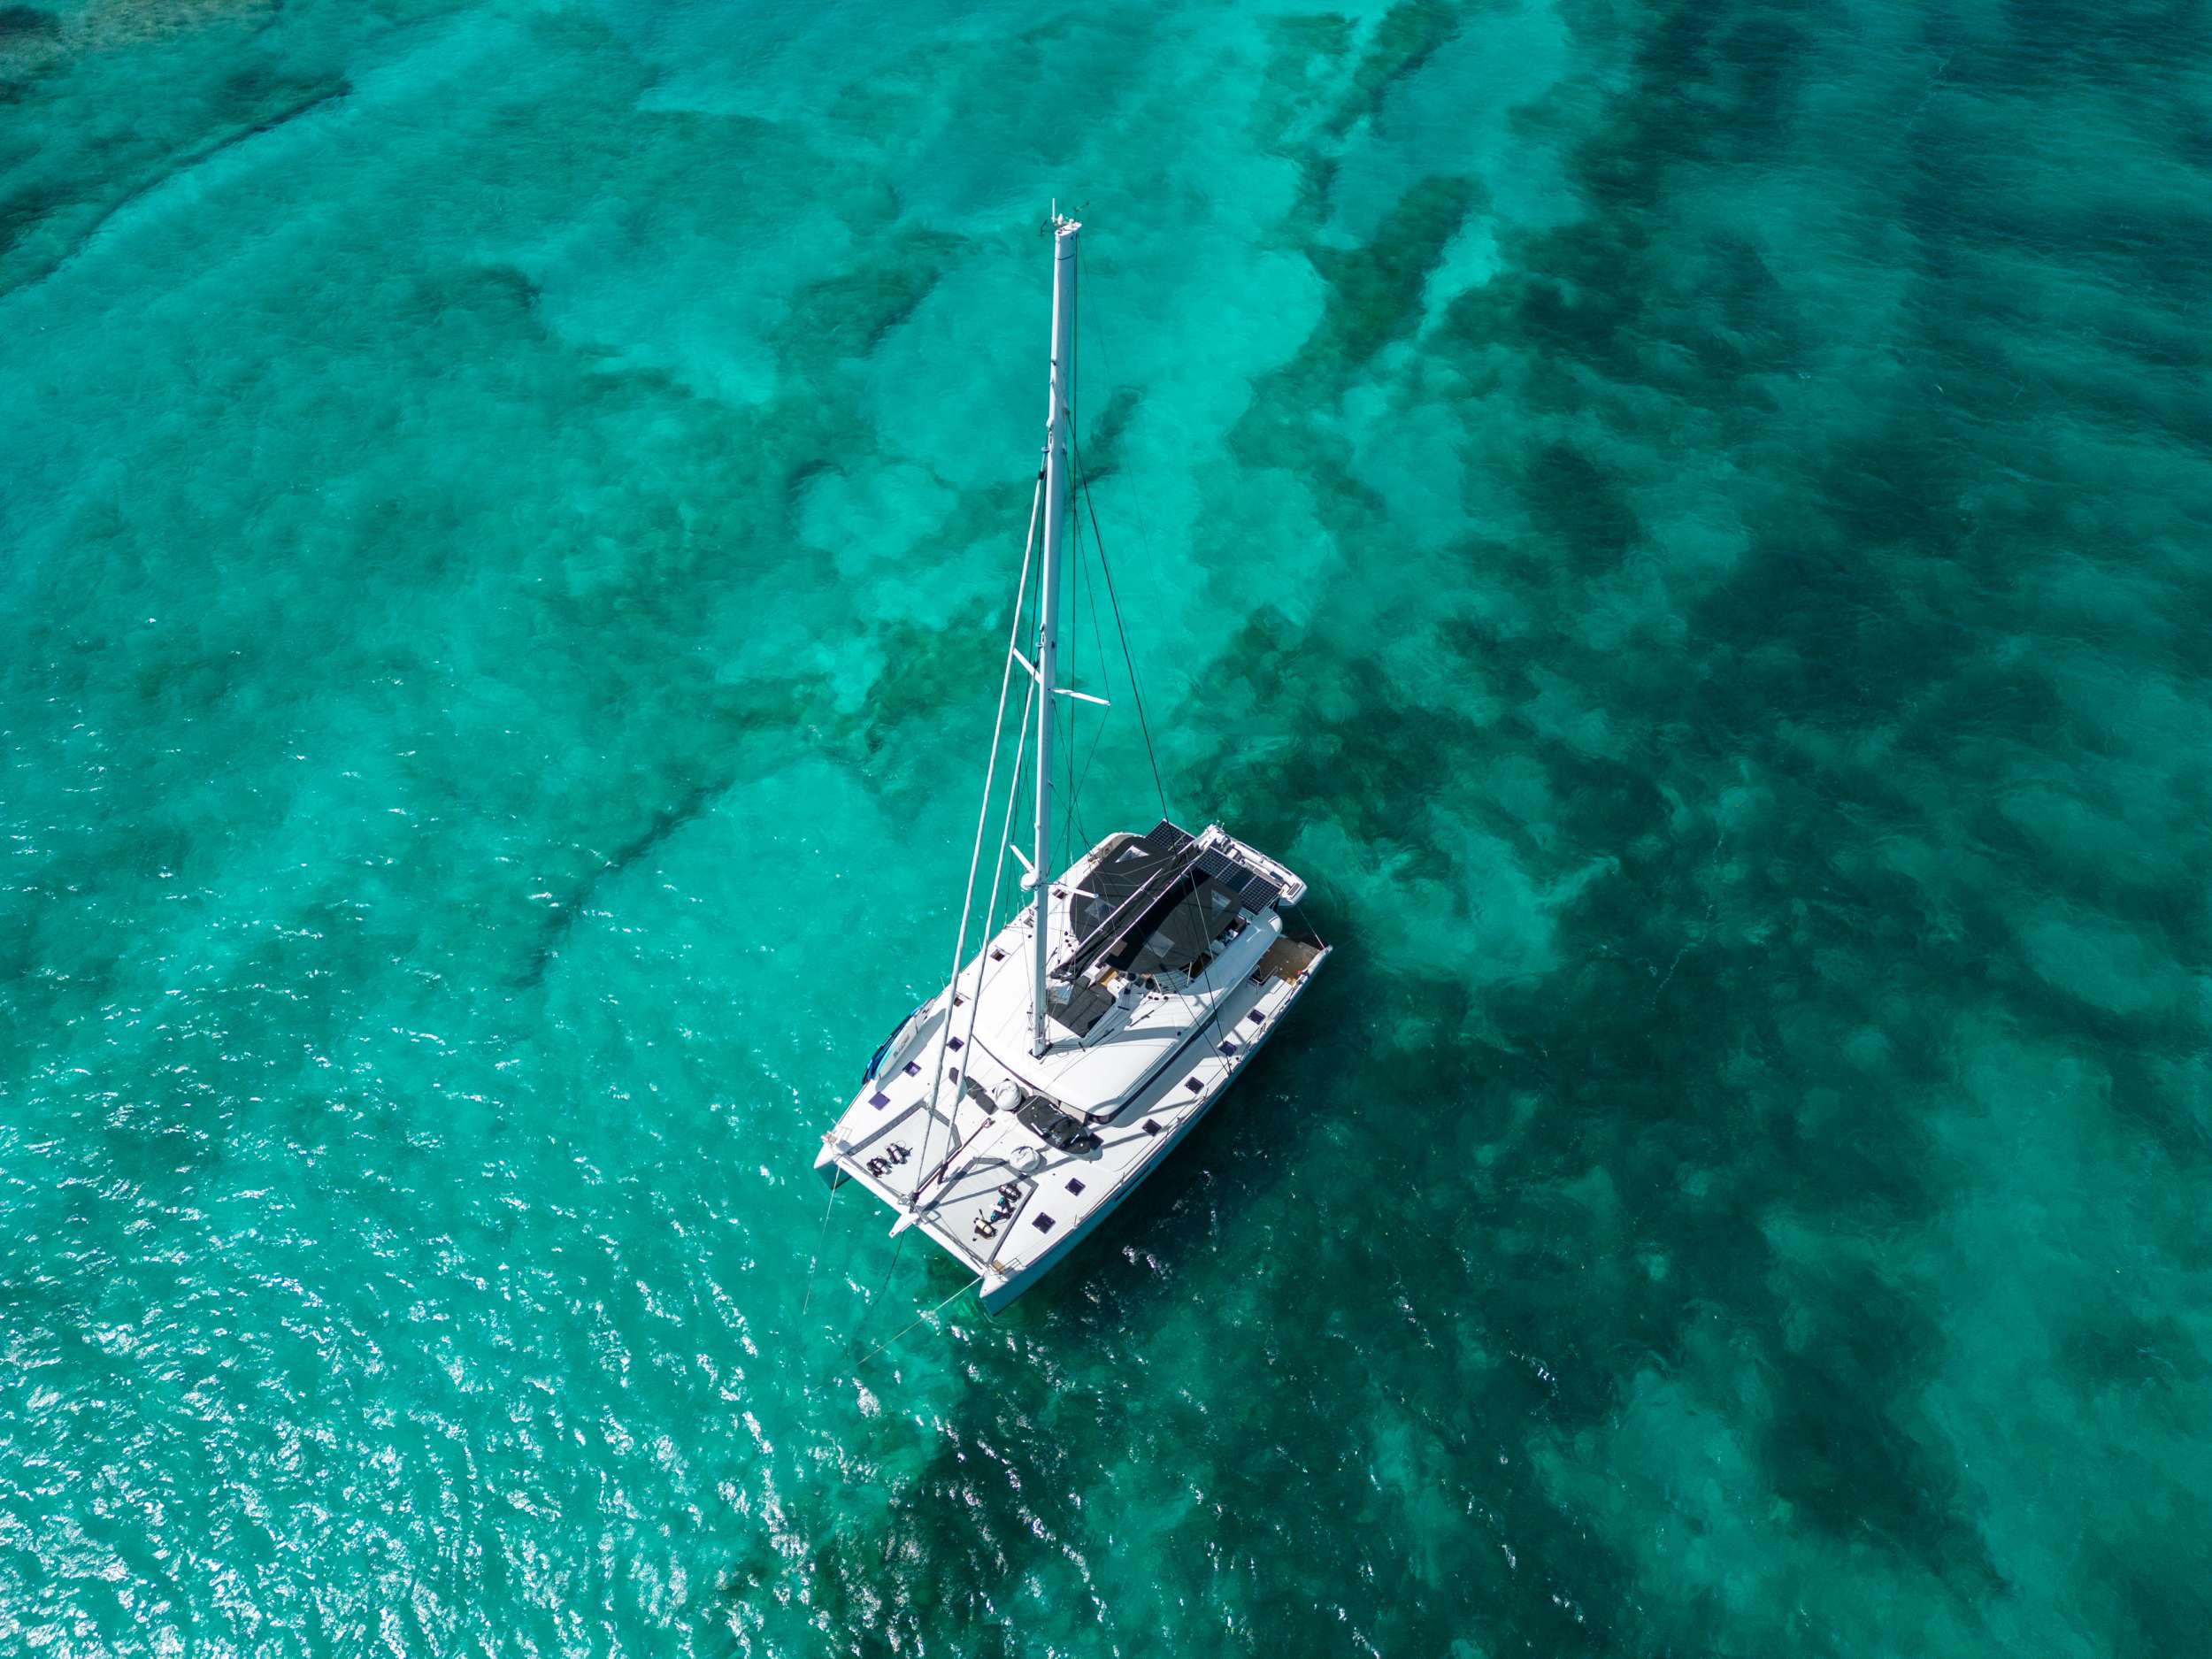 ASCENSION is a wonderfully equipped Lagoon 620 catamaran with a modern and elegant look. Accommodating 8 guests in 4 splendid double cabins, she boasts a spacious salon on the main deck. Her outdoor areas are equally impressive and allow to relax while enjoying exceptional views. Furthermore, a wide range of water toys is available, ensuring seamless entertainment for those who are ready to create lasting memories. The experienced crew of 3 provides outstanding service and offers guests an unforgettable stay on board.